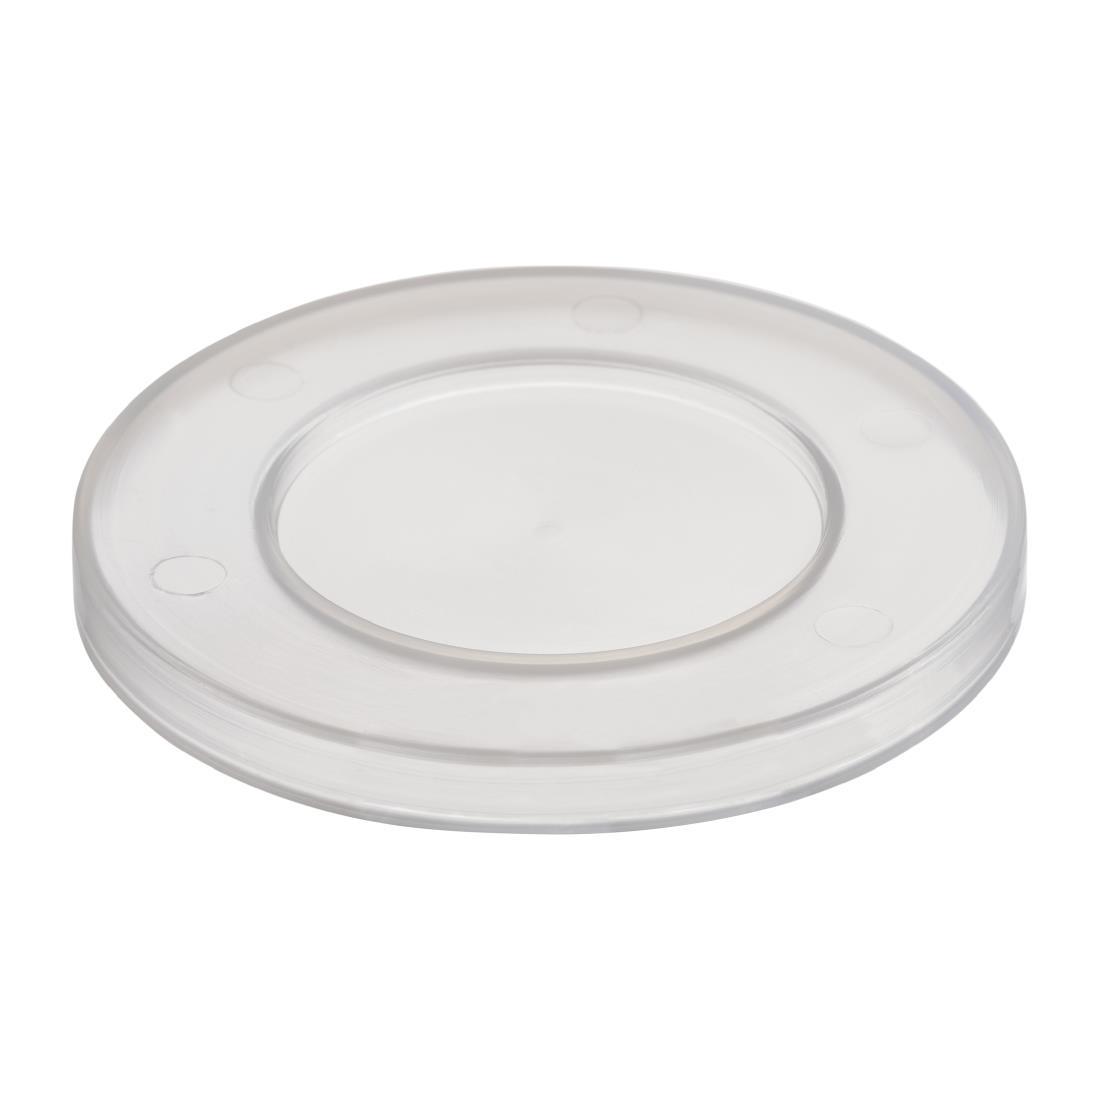 APS Casual Polypropylene Cover Set 80mm (Pack of 5) - FT204  - 3